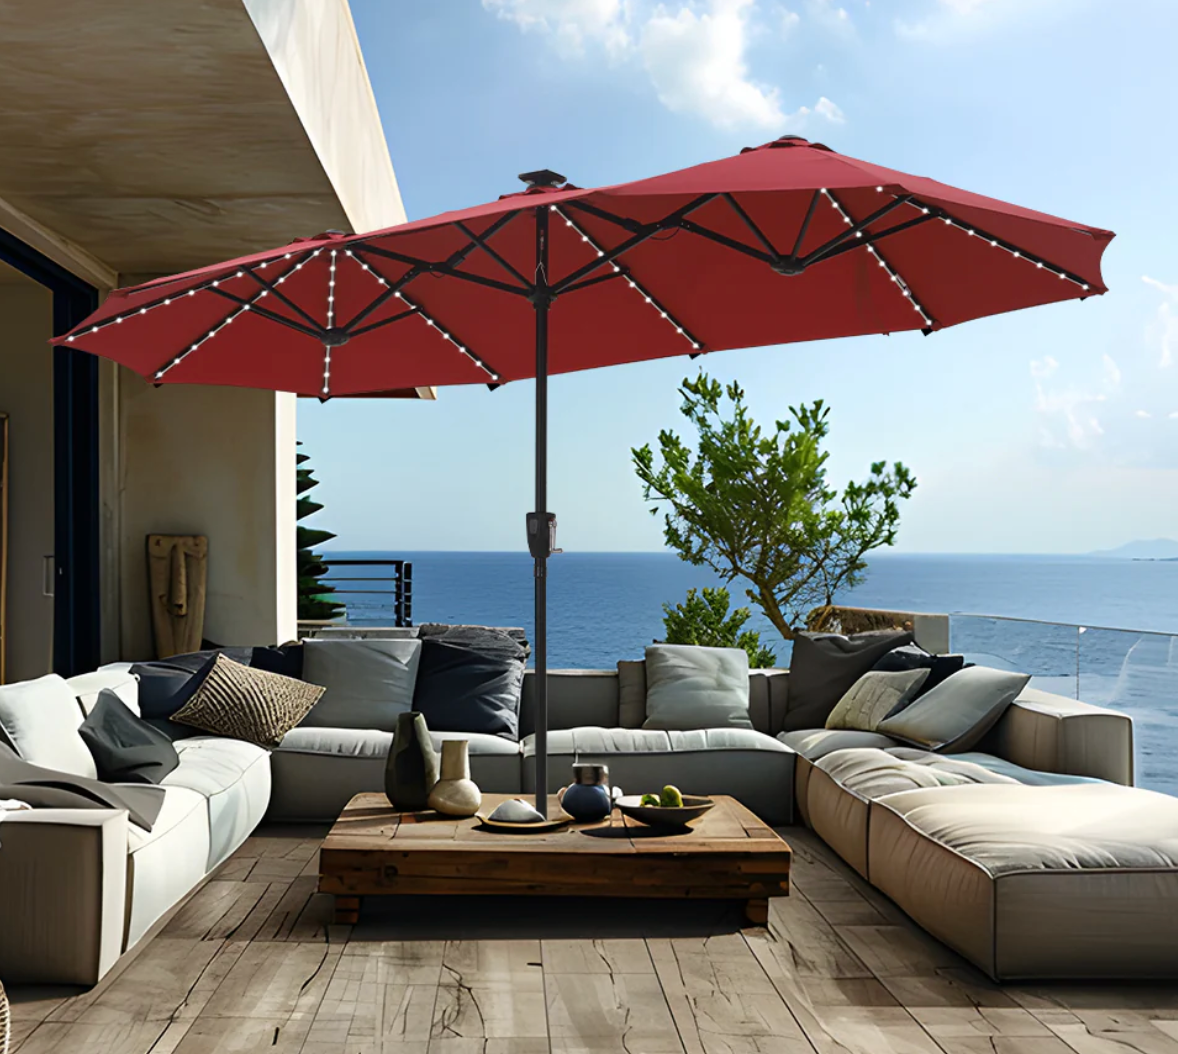 The photo shows a red patio umbrella, an L-shaped outdoor sectional sofa, and a wooden coffee table on a deck overlooking the sea.